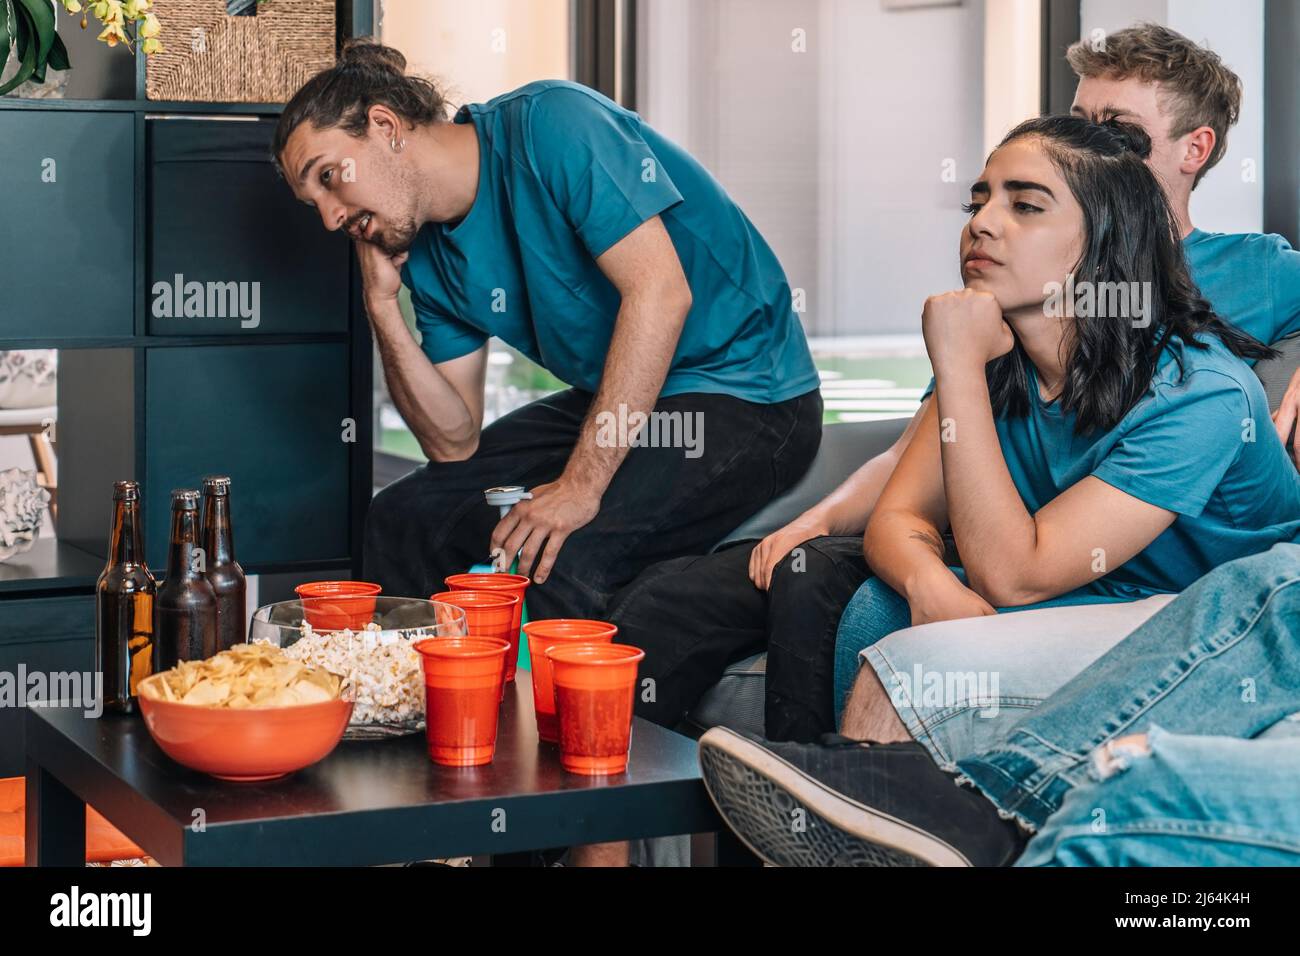 Football fans saddened by their team's defeat. Close-up of a table full of drinks and snacks for a party Stock Photo